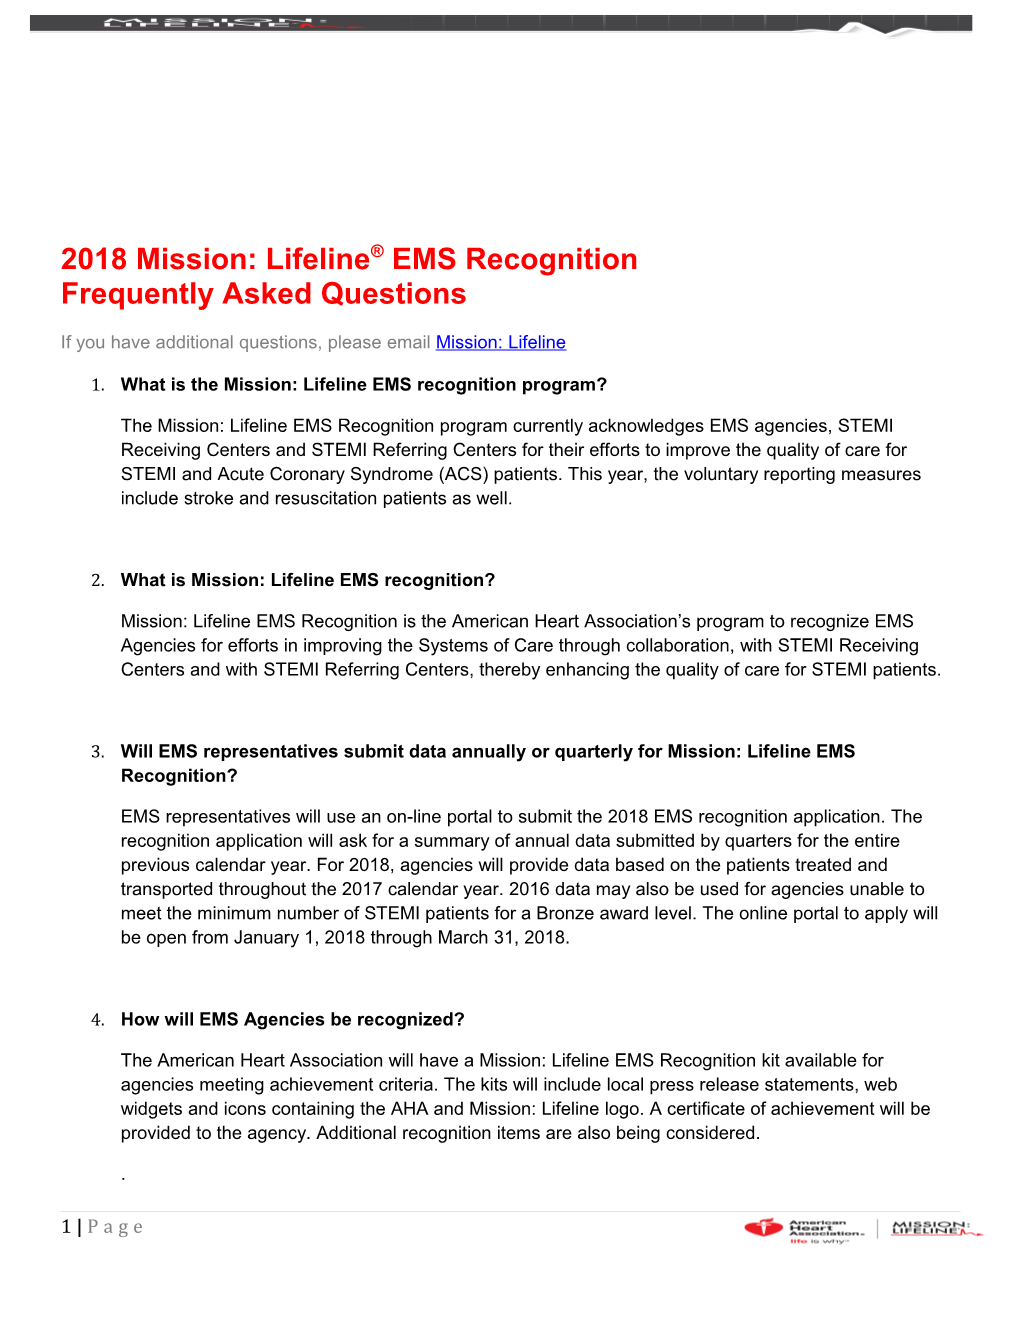 1.What Is the Mission: Lifeline EMS Recognition Program?